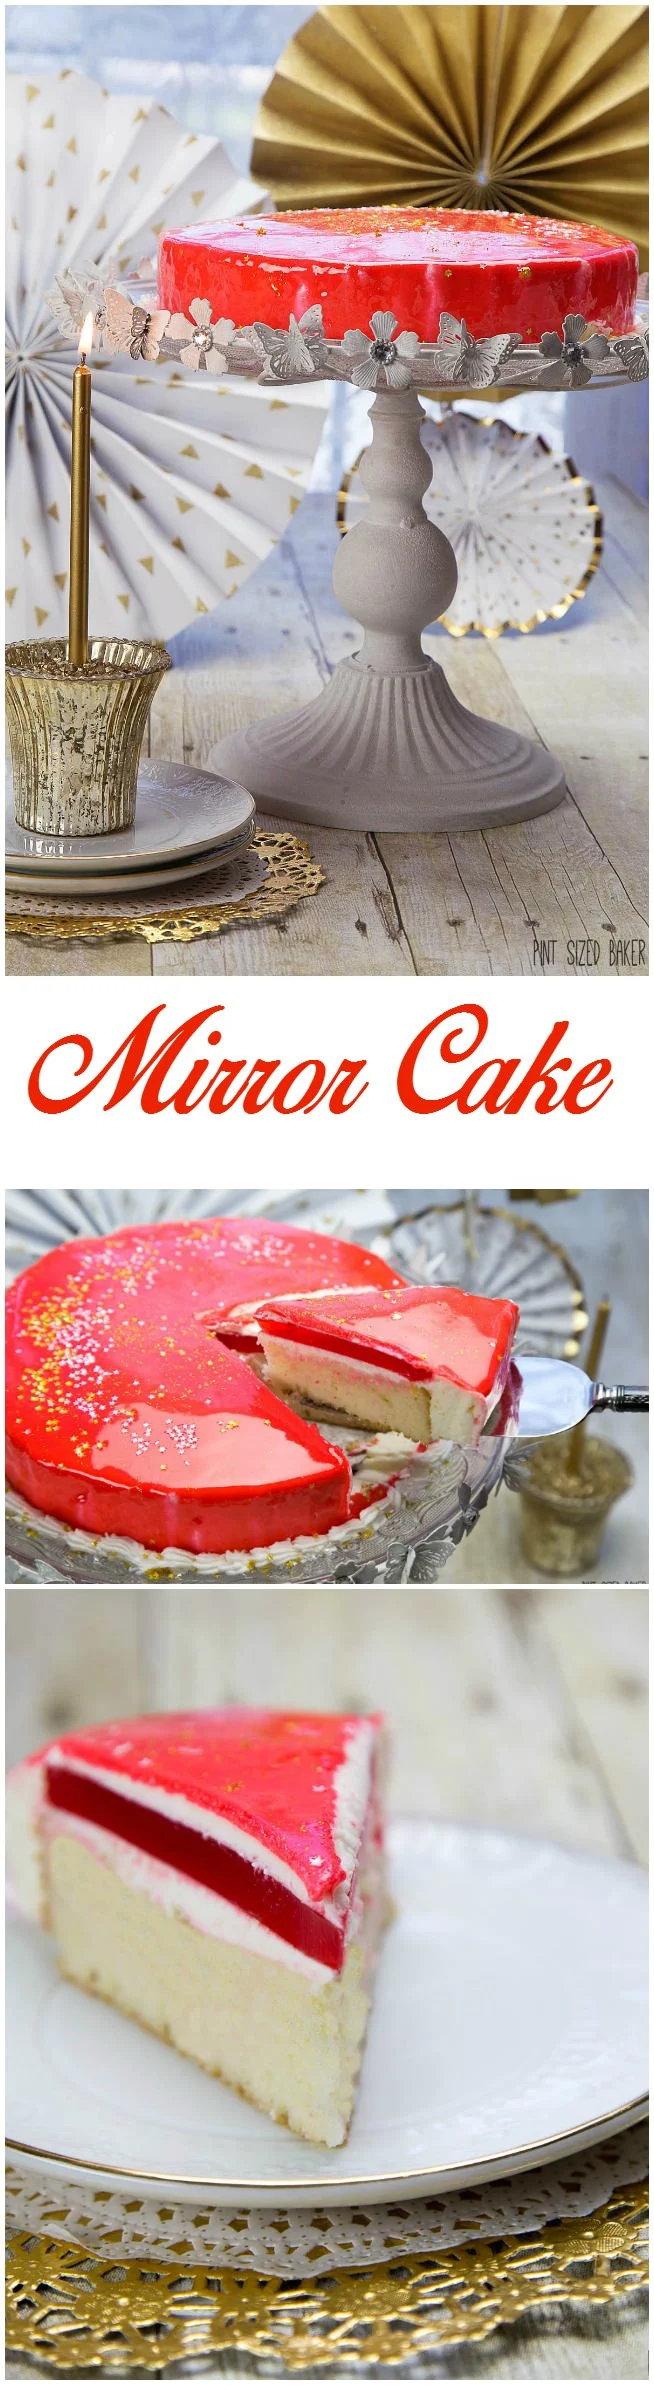 Make a Mirror Birthday Cake for someone special this year! No huge decorations required.